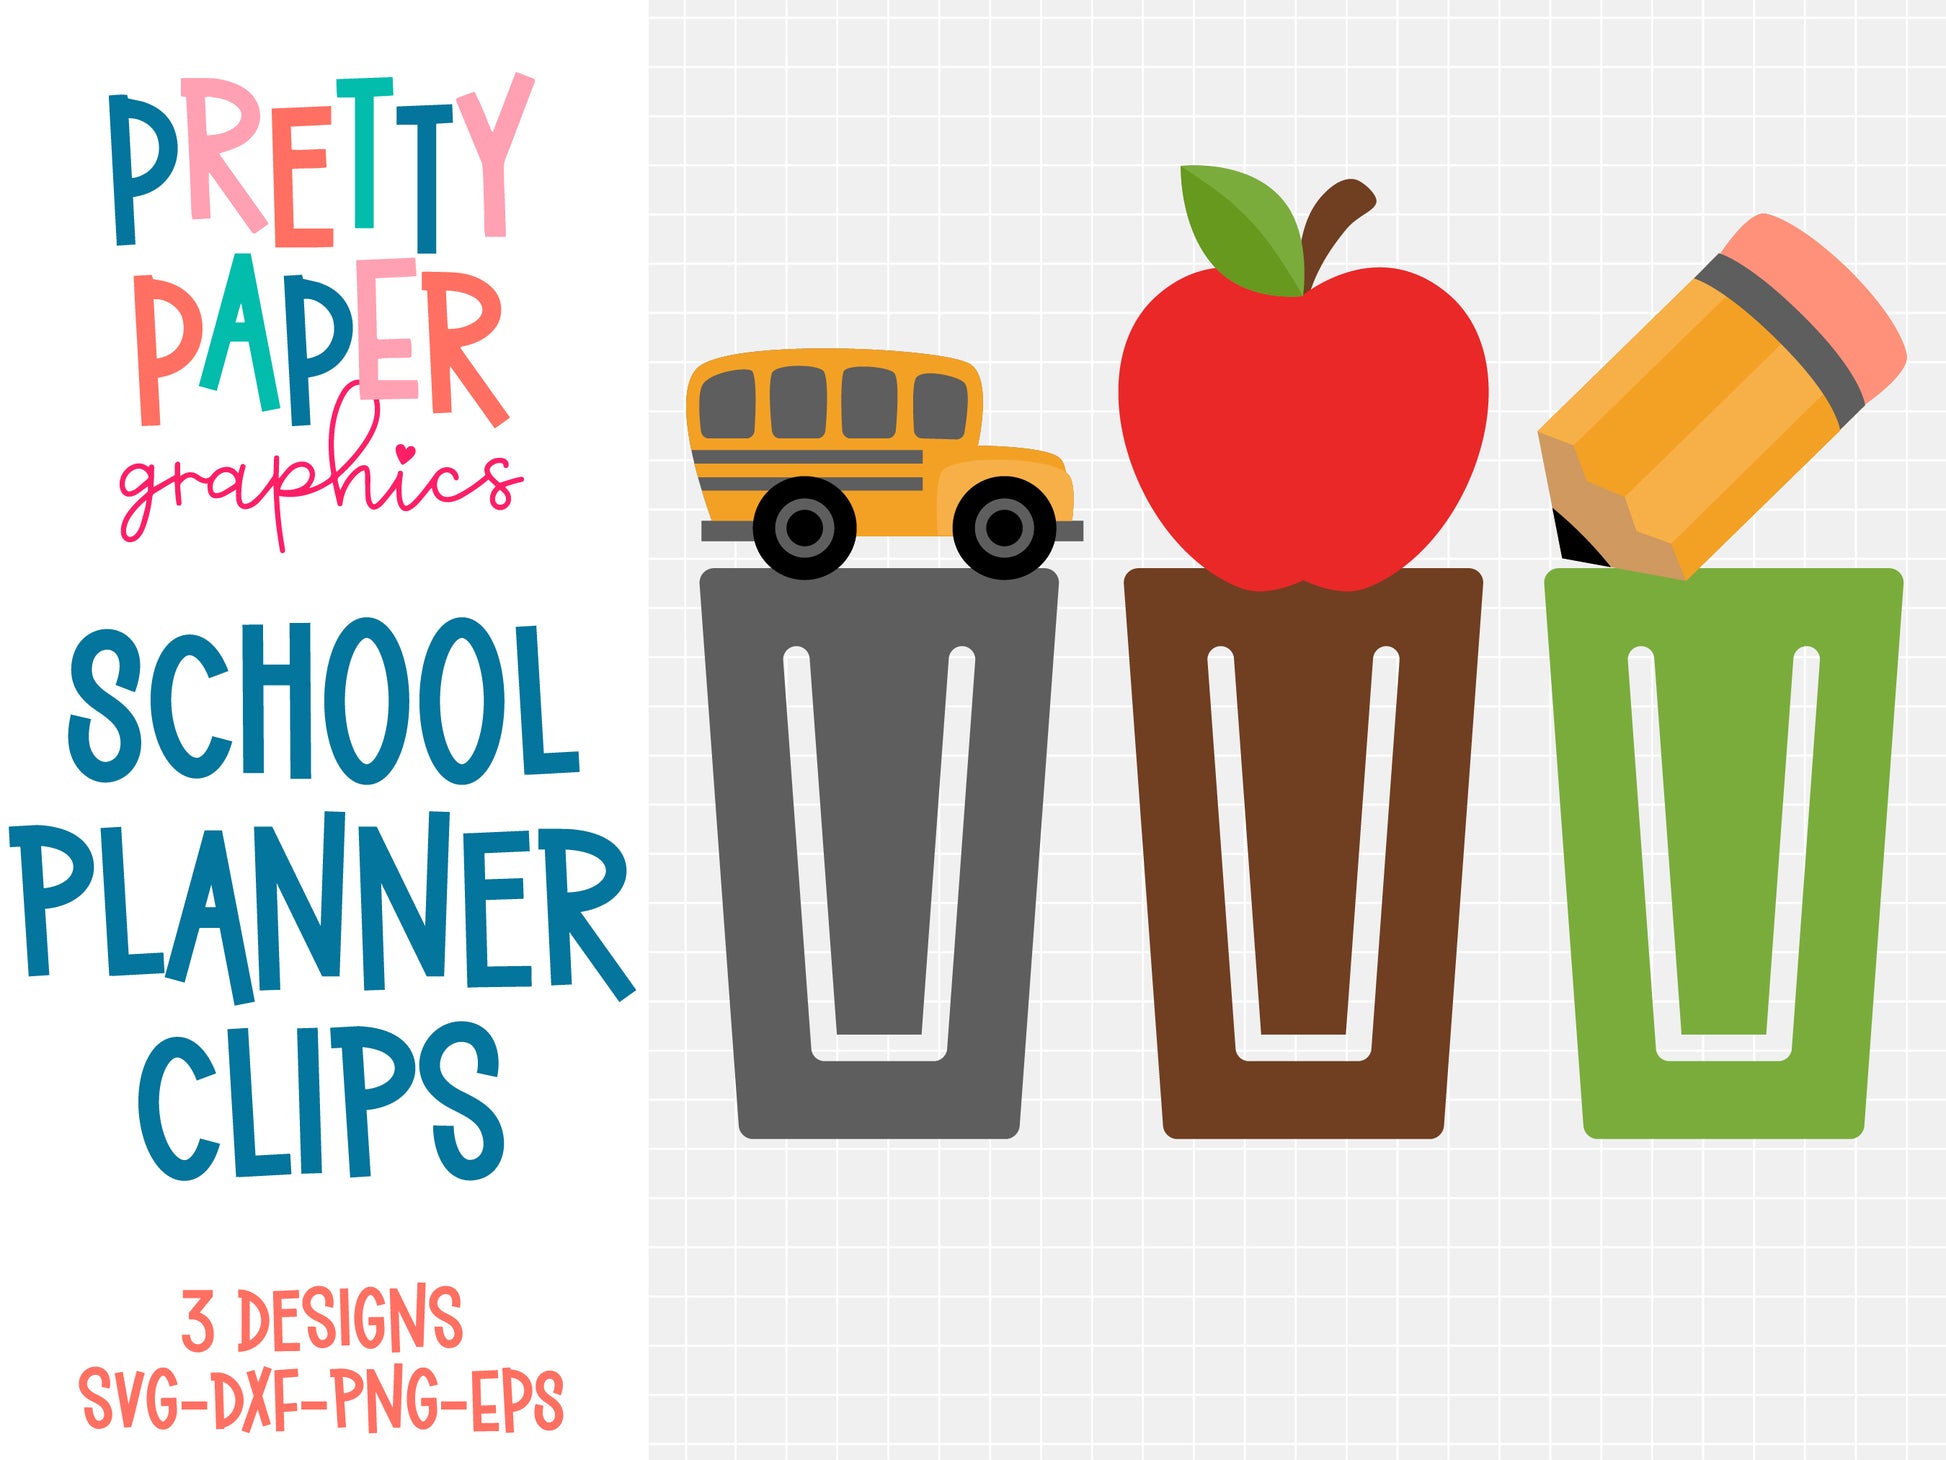 School Planner Clips SVG Cut Files by Pretty Paper Graphics